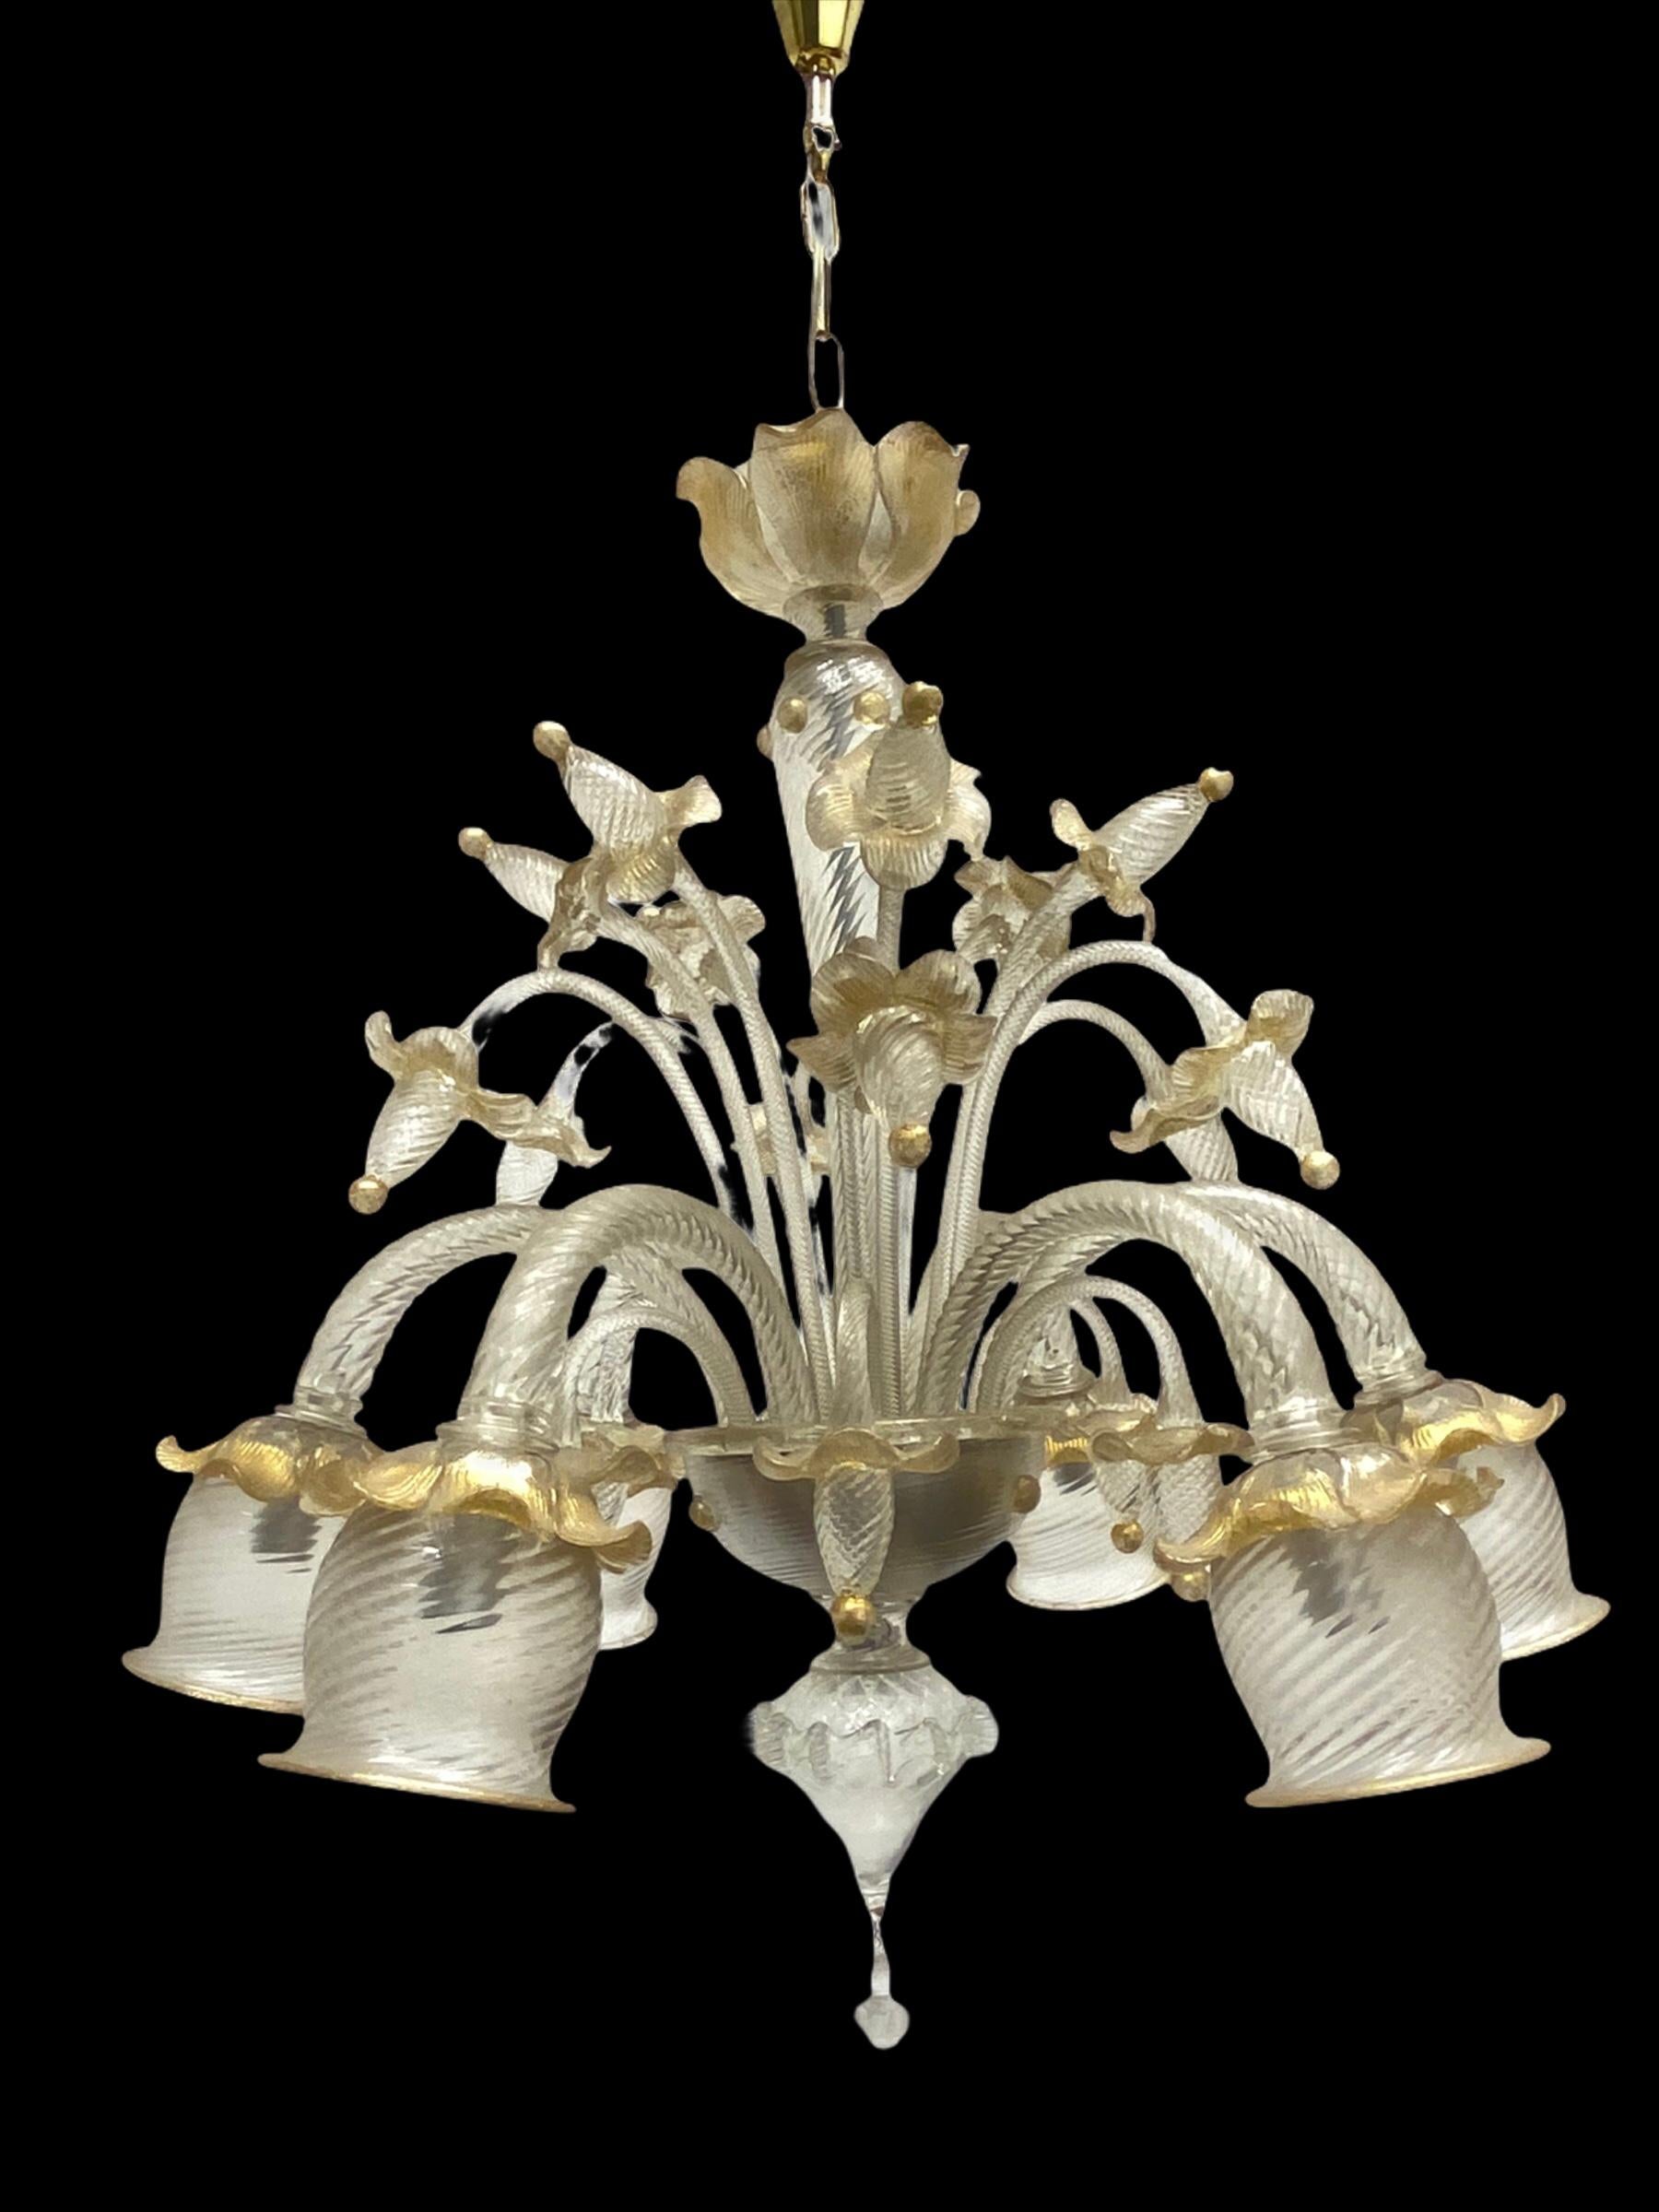 Hollywood Regency Stunning Gold Dusted Murano Chandelier, by Barovier Toso Murano, Italy, 1960s For Sale